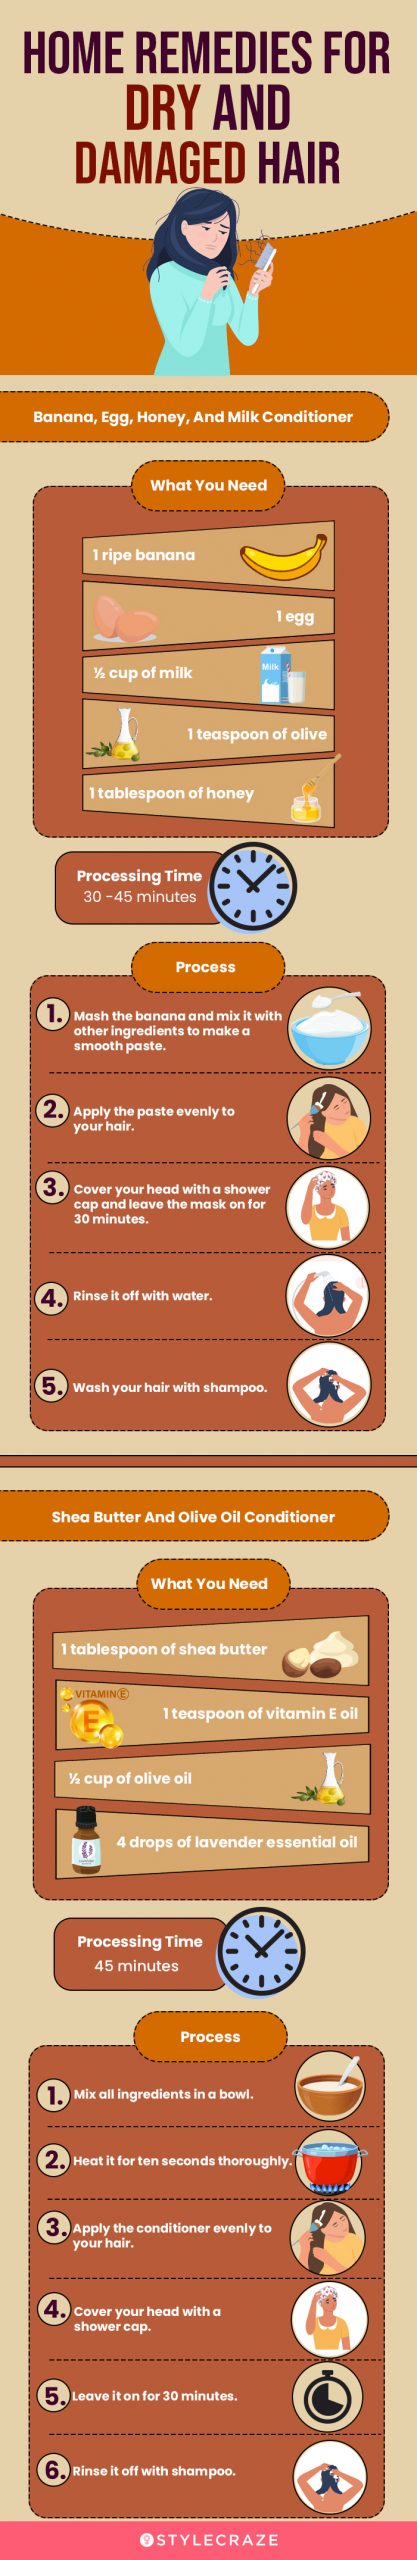 home remedies for dry and damaged hair (infographic)